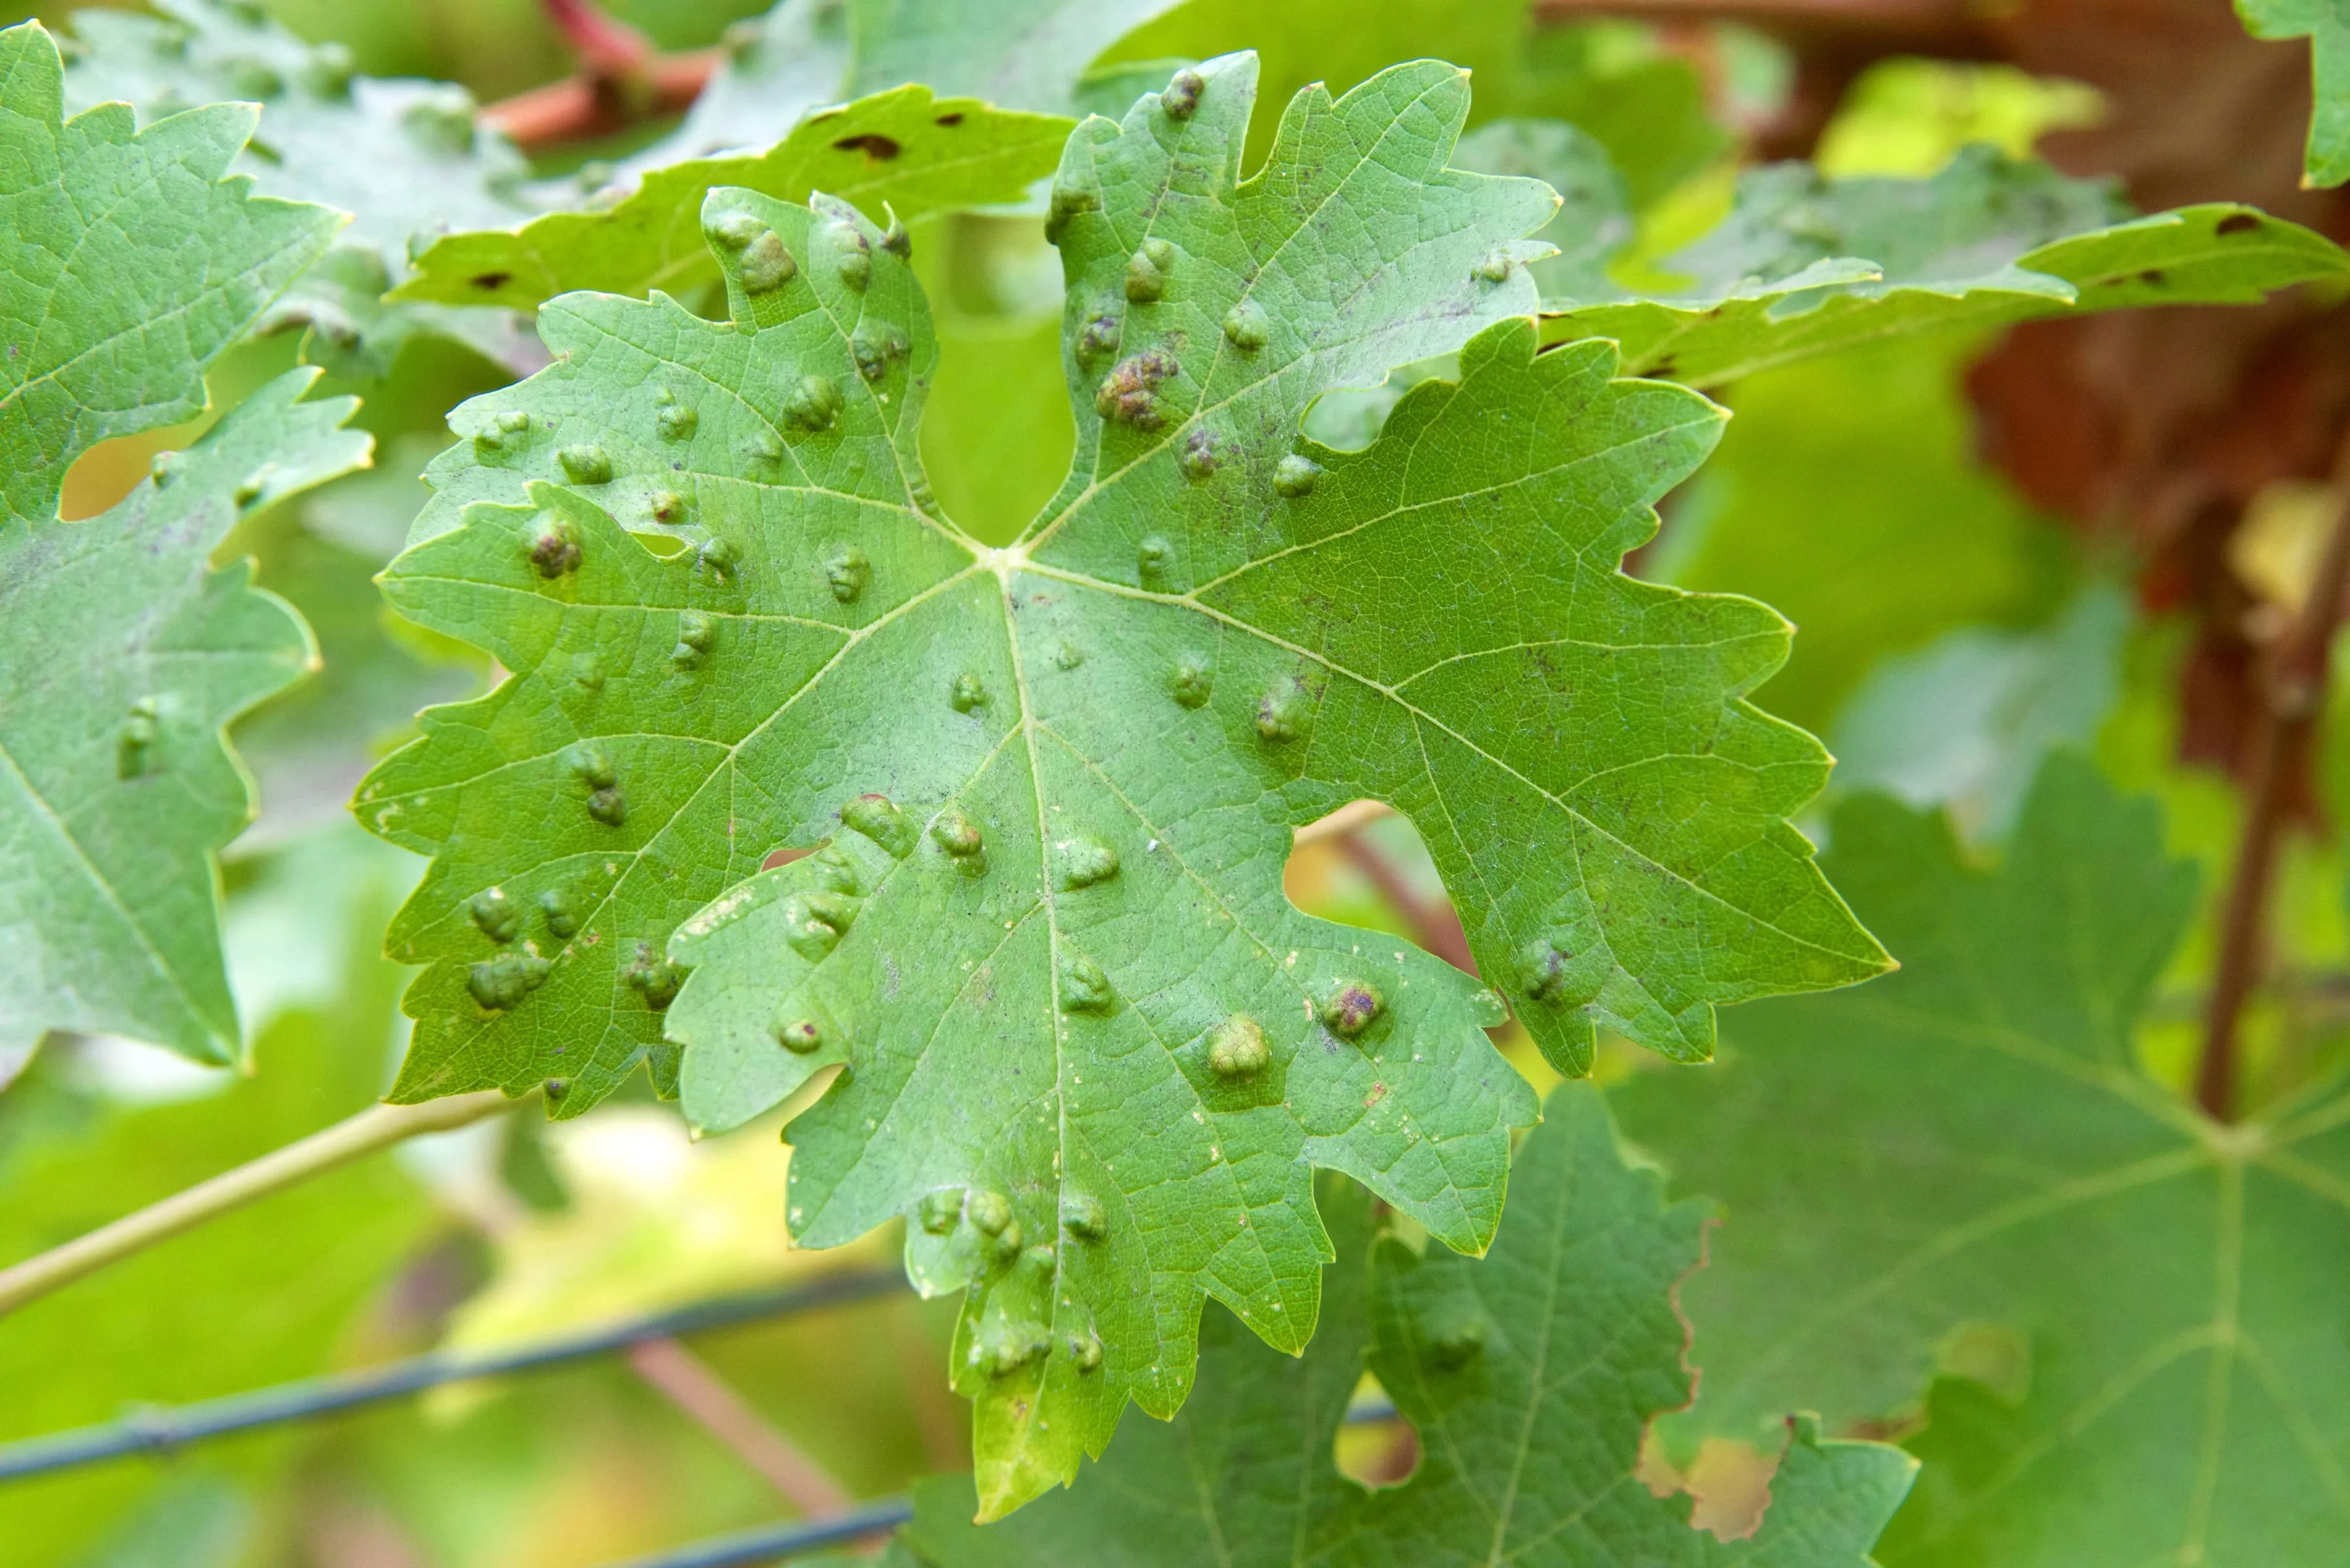 leaf-galls-look-like-warts-on-grape-leaves-caused-by-a-parasite